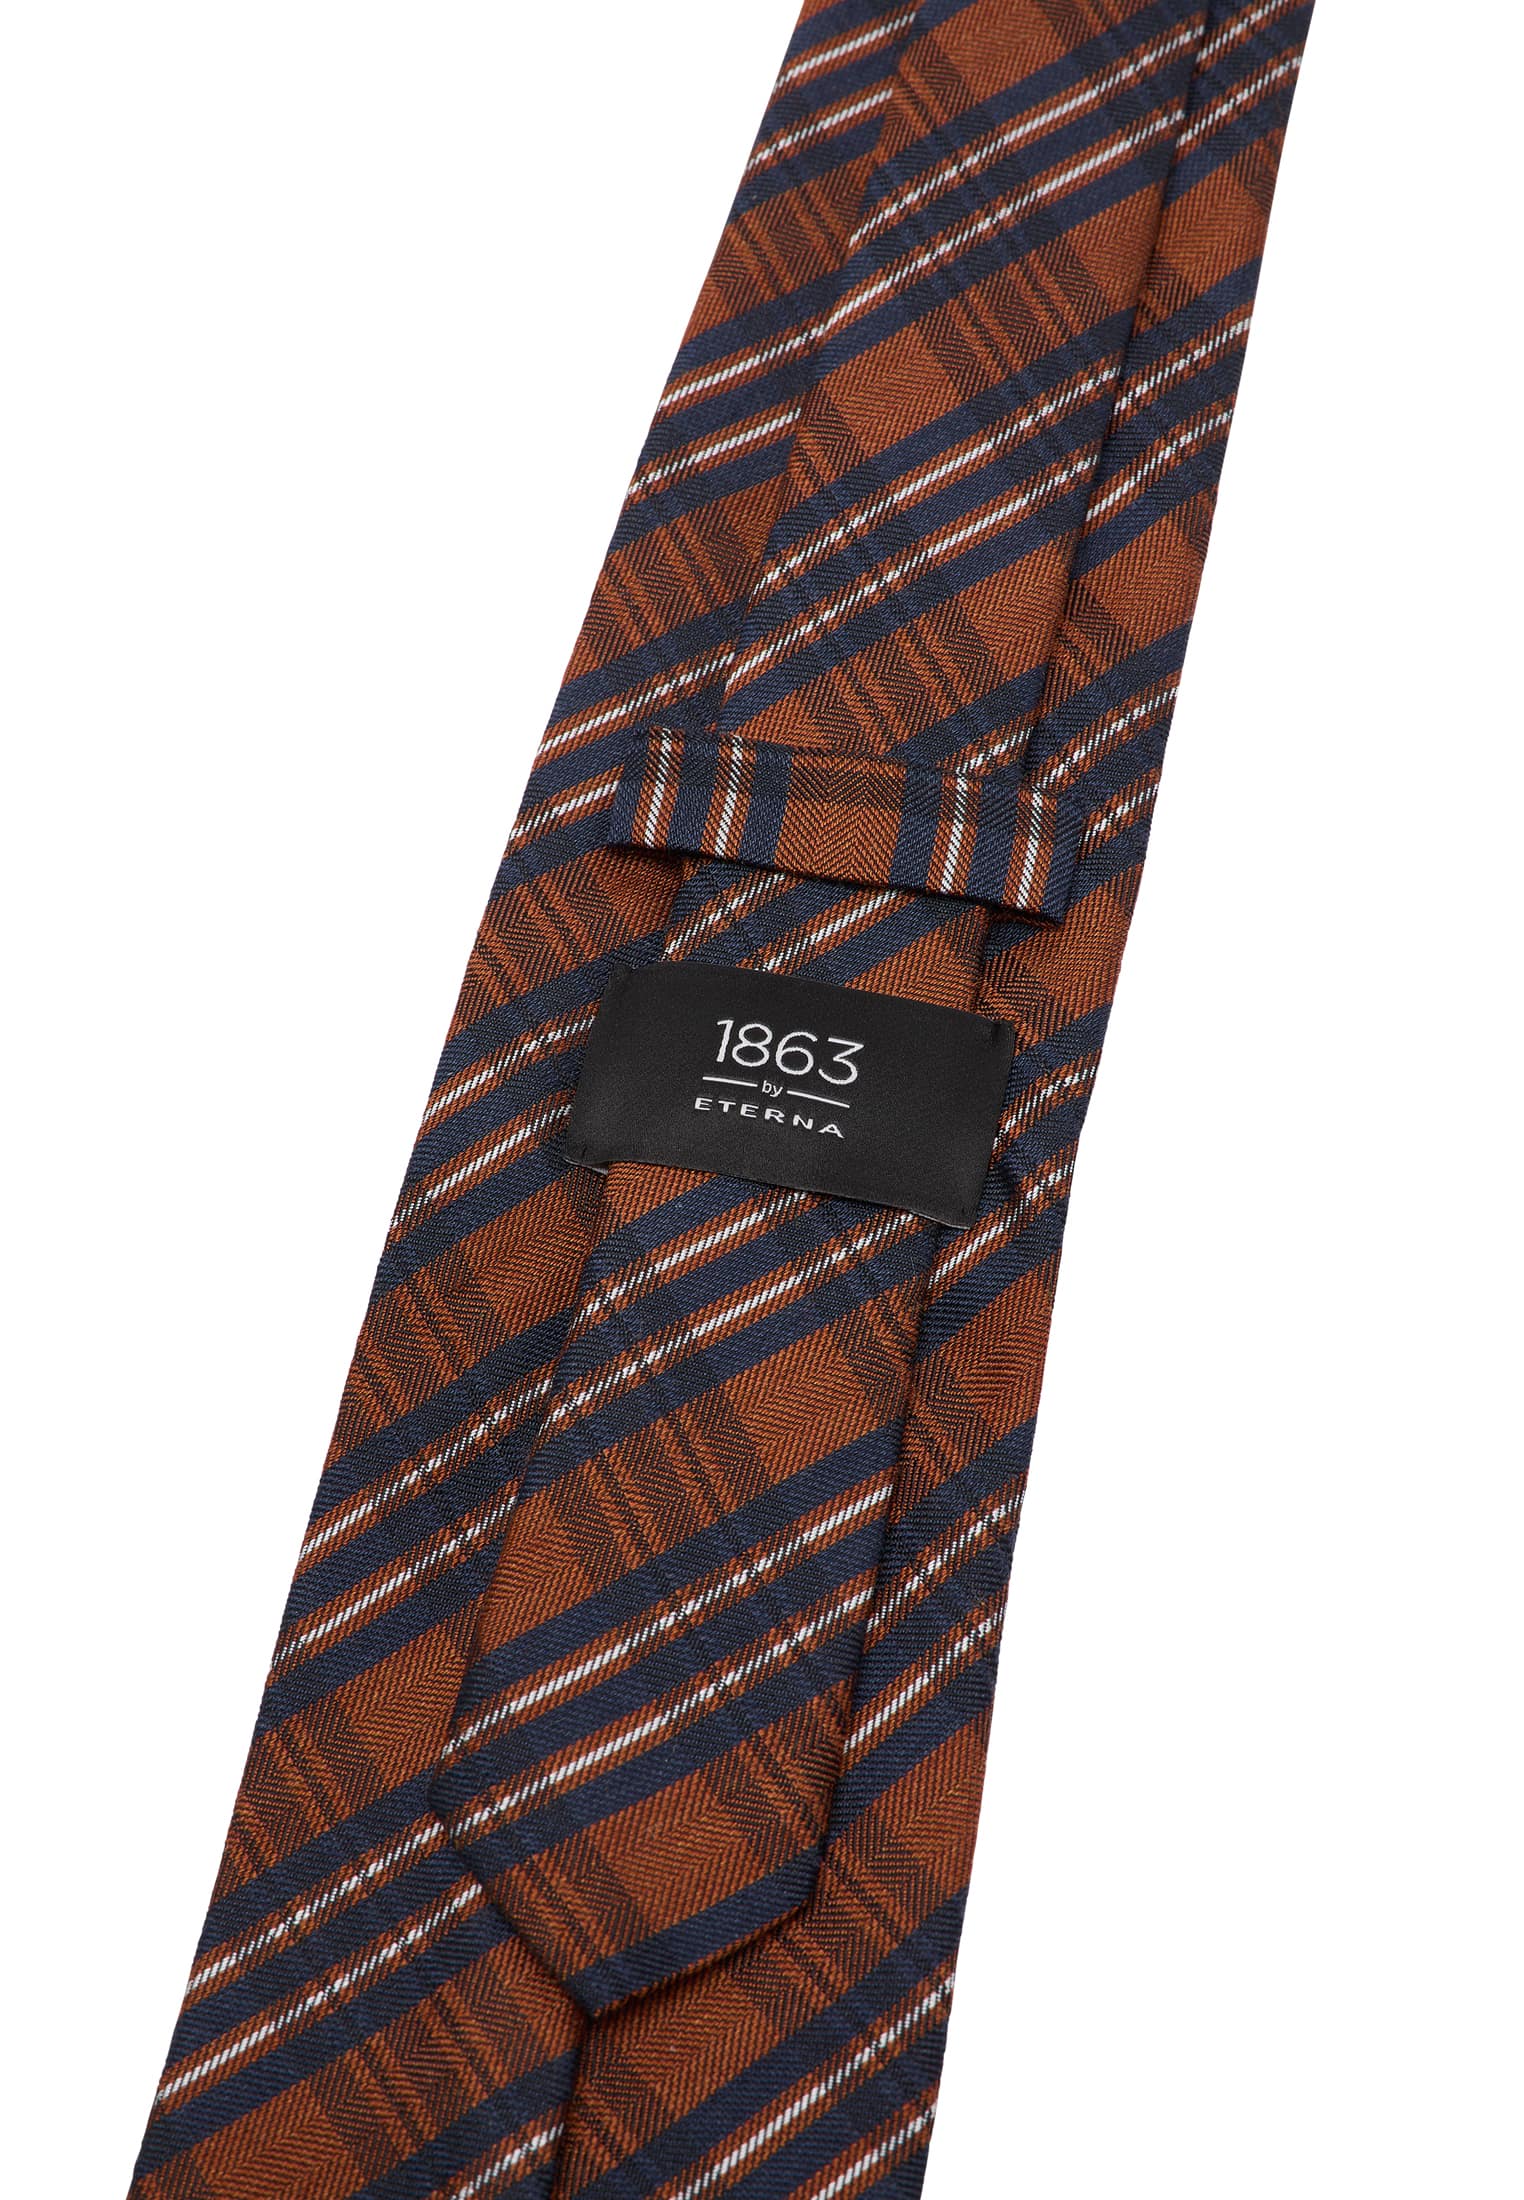 Tie in brown checkered | brown | 142 | 1AC01934-02-91-142